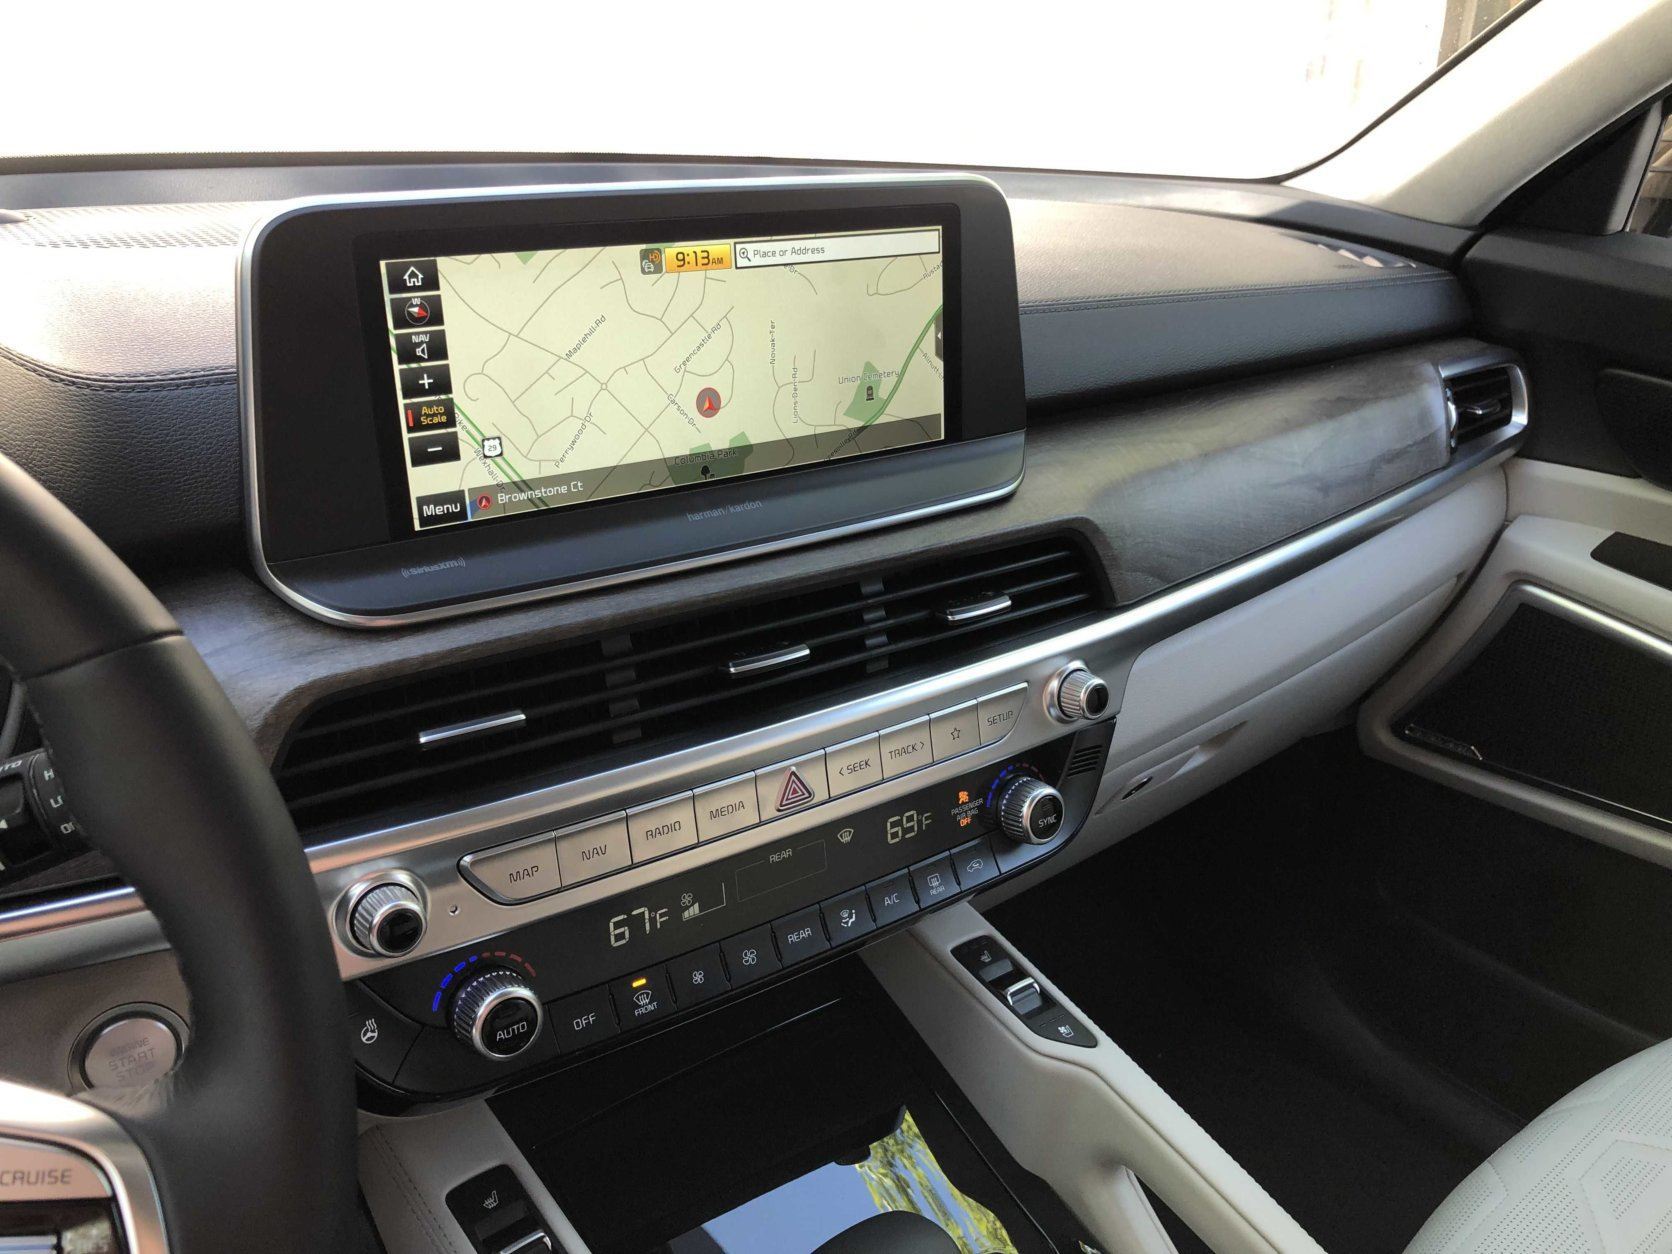 It features a Large 10-inch touchscreen and easy to use knobs and buttons. (WTOP/Mike Parris)